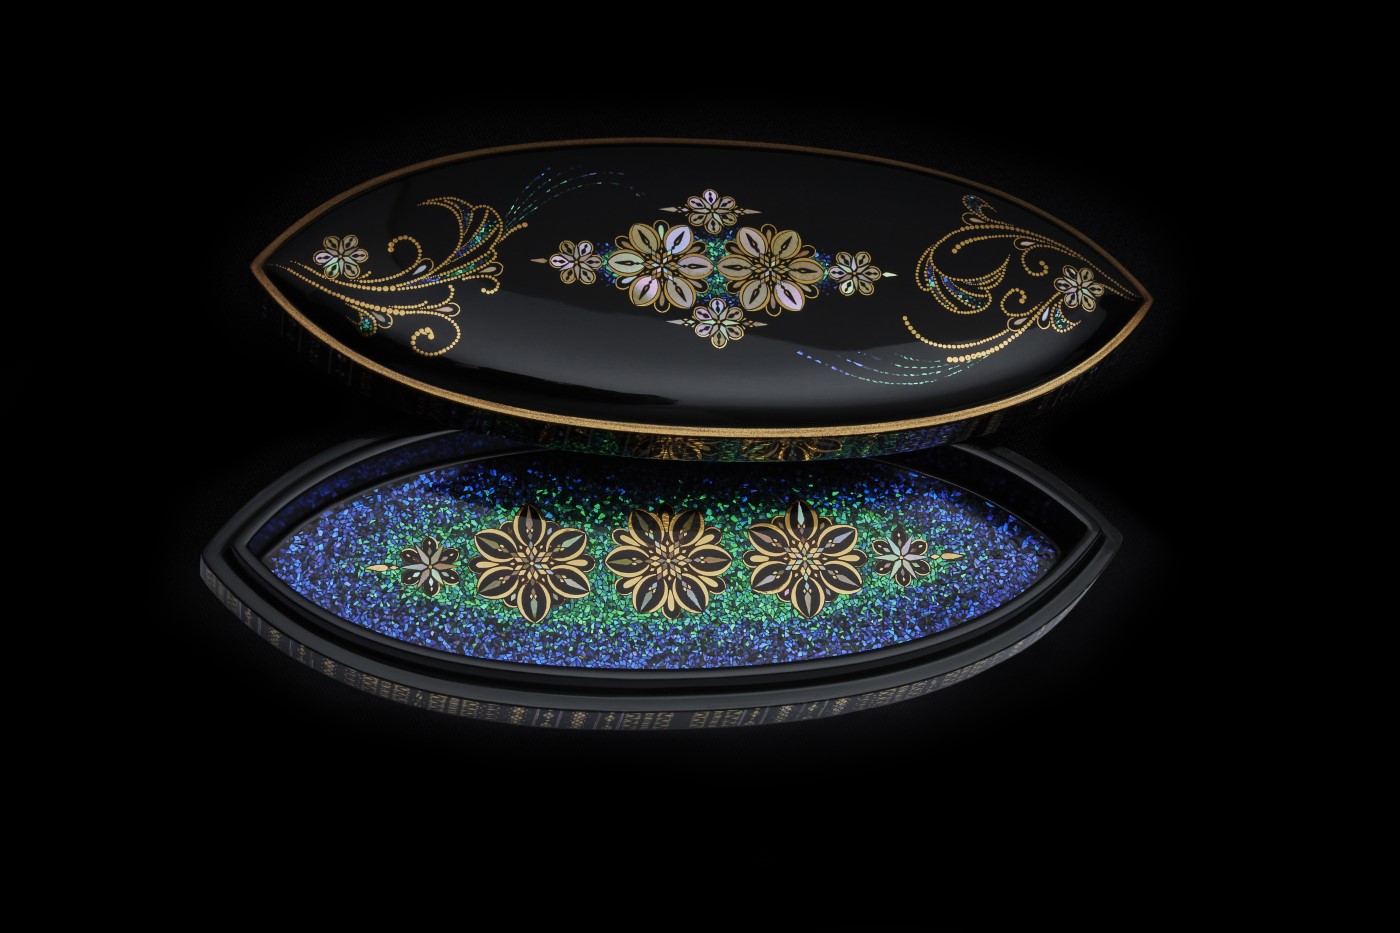 Boat Shaped Box with Design of Composite Flowers in Maki-e and Inlaid Mother-of-pearl, 